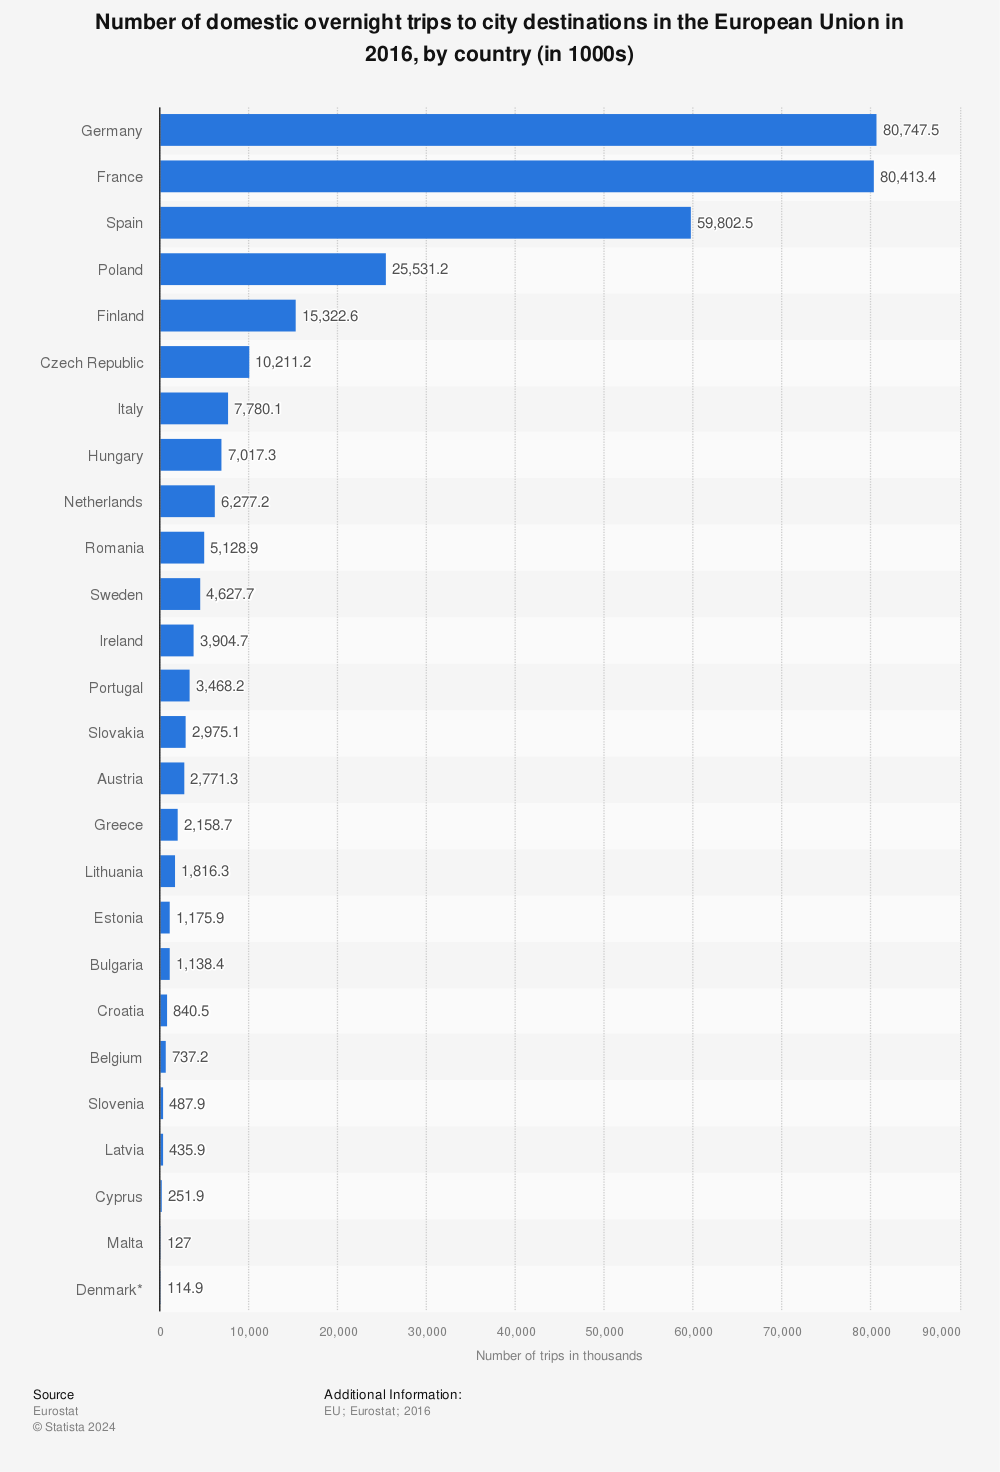 Statistic: Number of domestic overnight trips to city destinations in the European Union in 2016, by country (in 1000s) | Statista